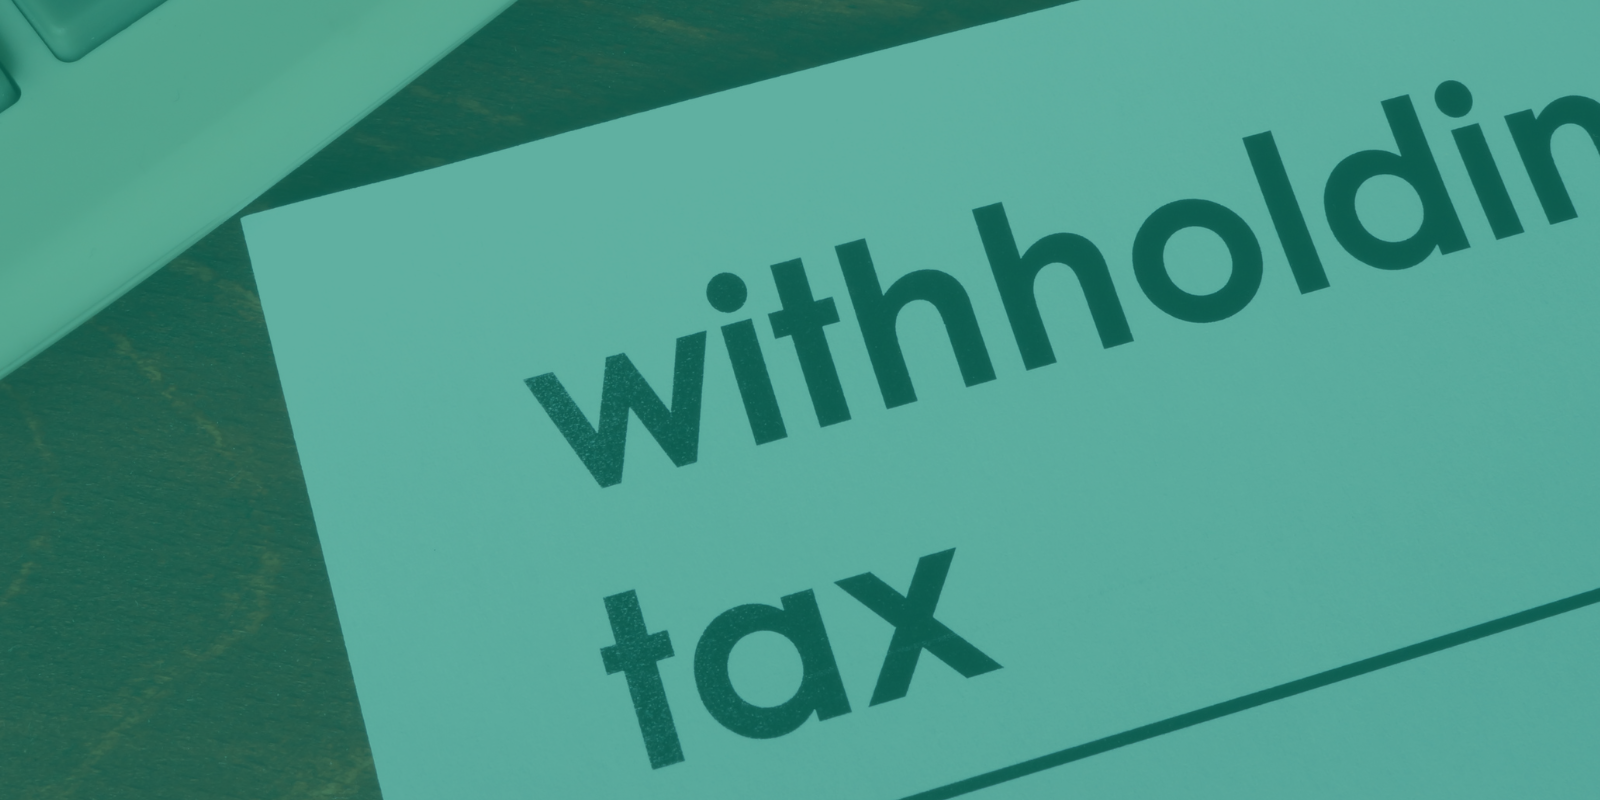 Key Differences In Withholding Tax Reporting Between Saudi Arabia And Other Jurisdictions